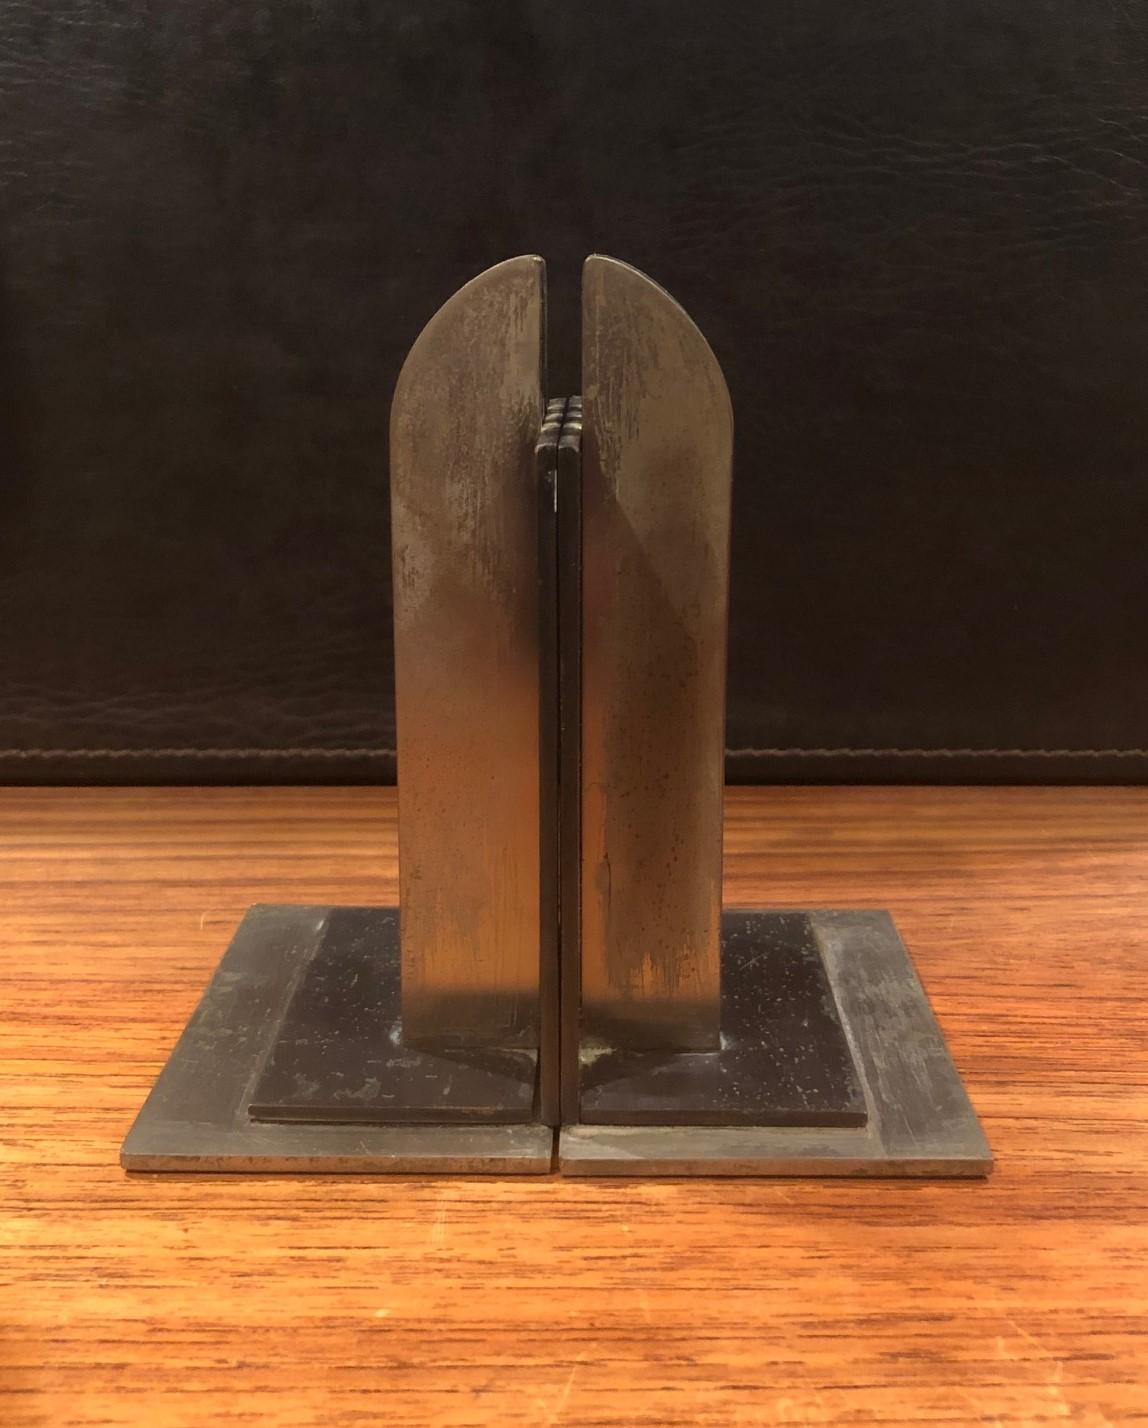 American Pair of Machine Age Art Deco Bookends by Walter Von Nessen for Chase & Co. No